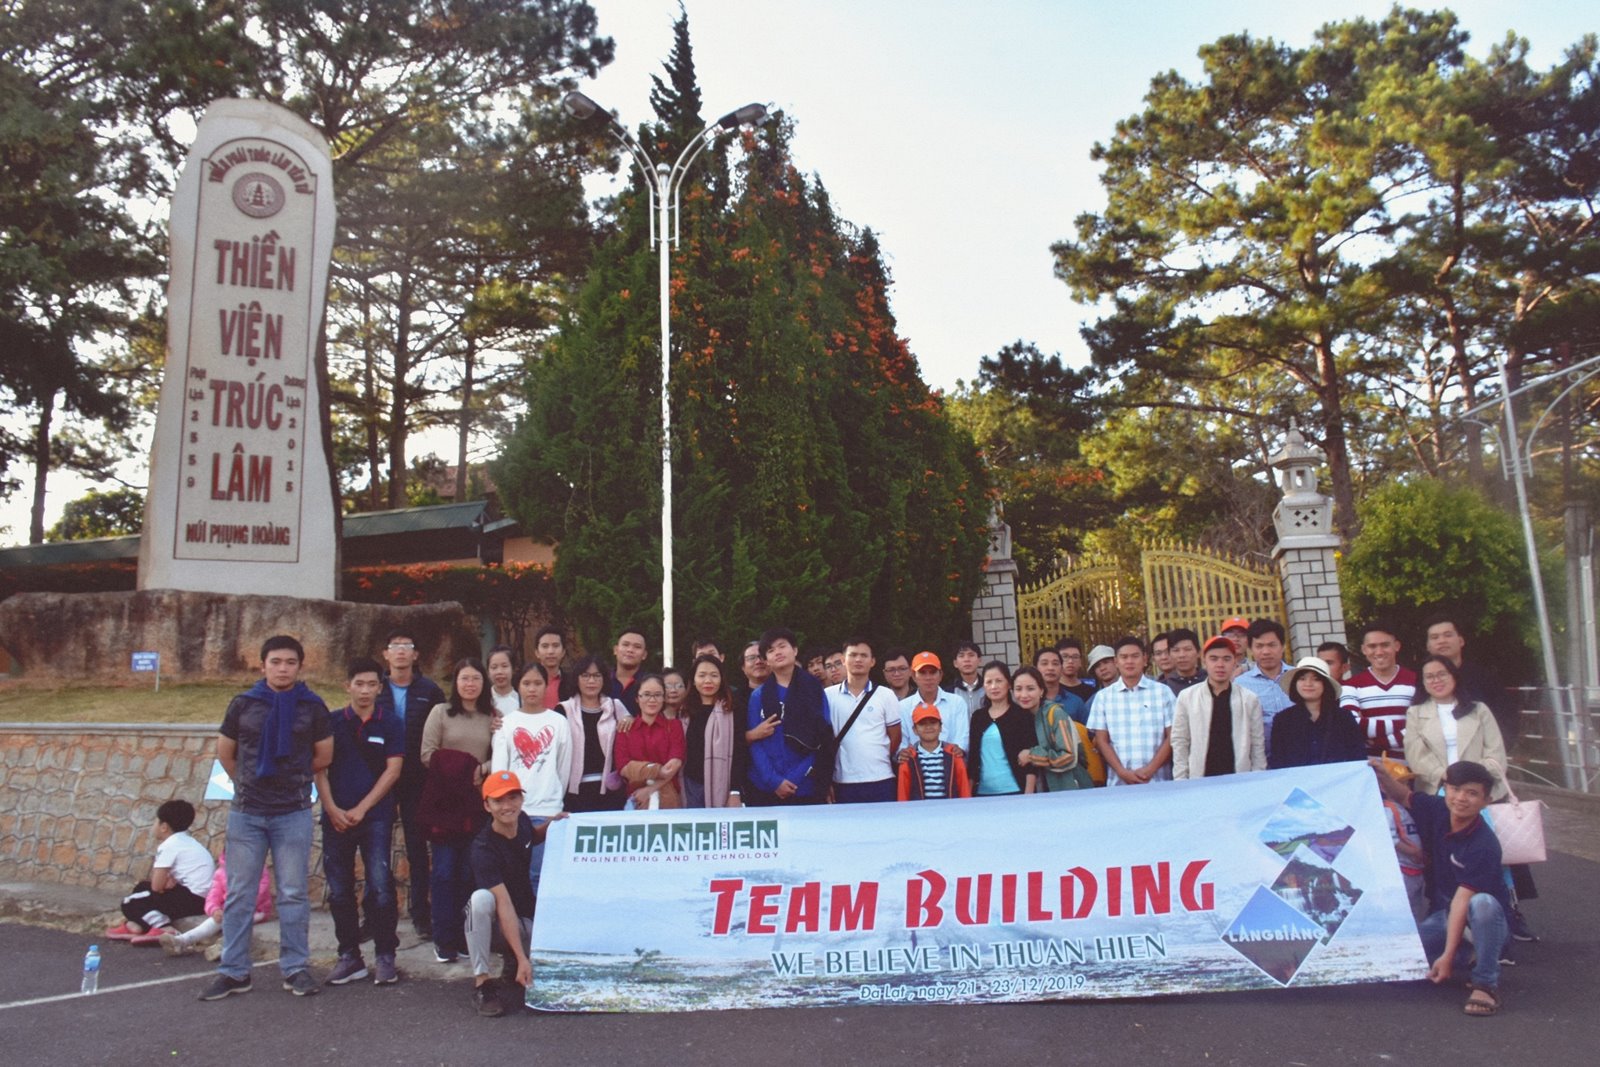 COMPANY TRIP 2019 - WE BELIEVE IN THUẬN HIỀN